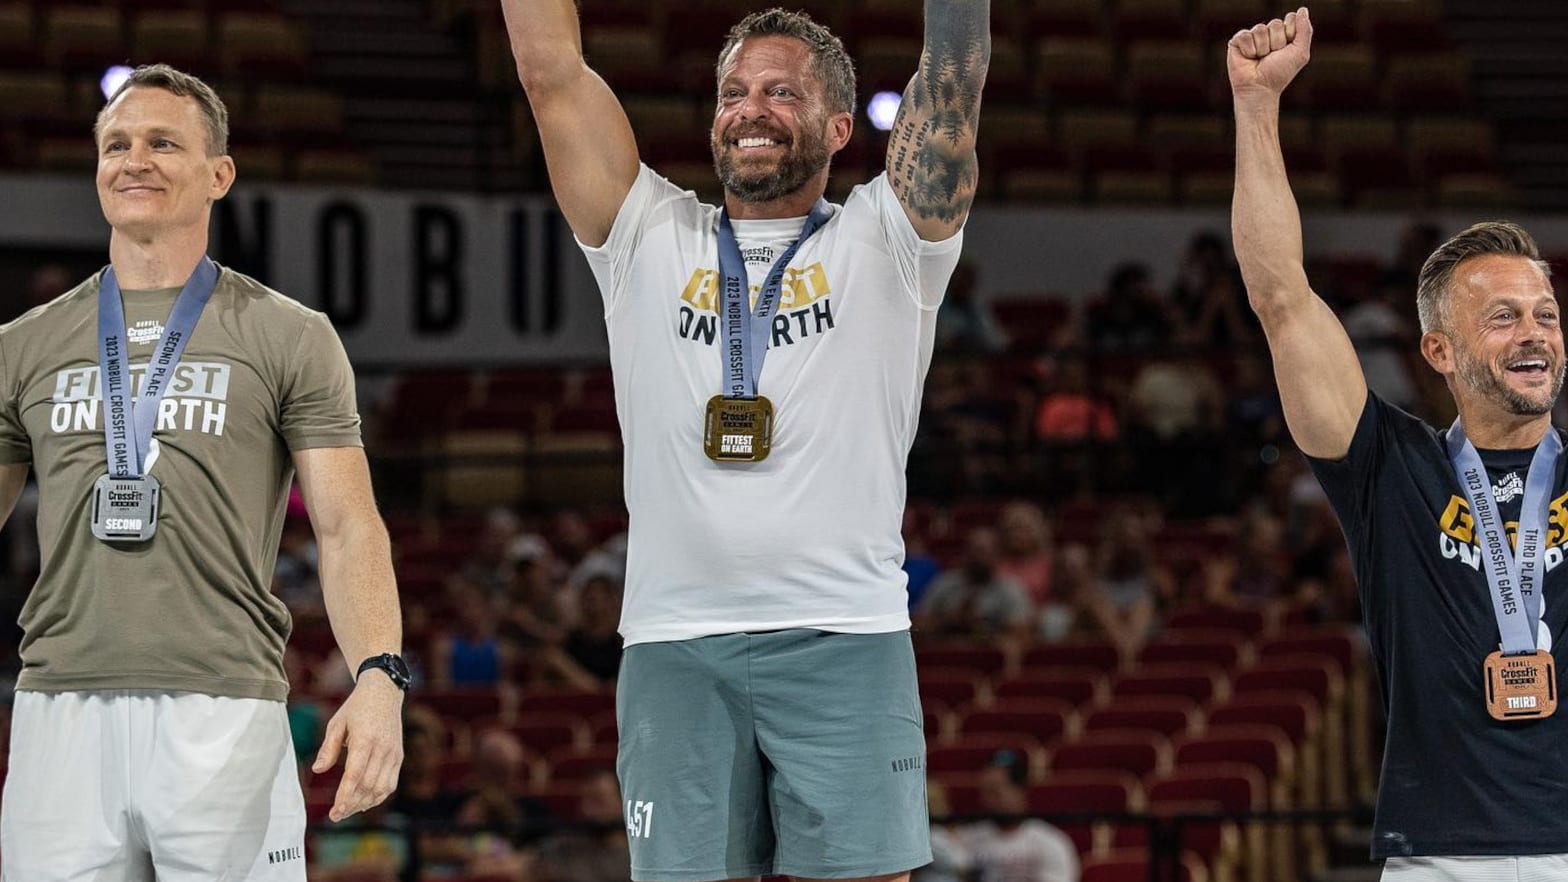 Discover the Exciting New CrossFit Masters Games Event by Legends in Birmingham